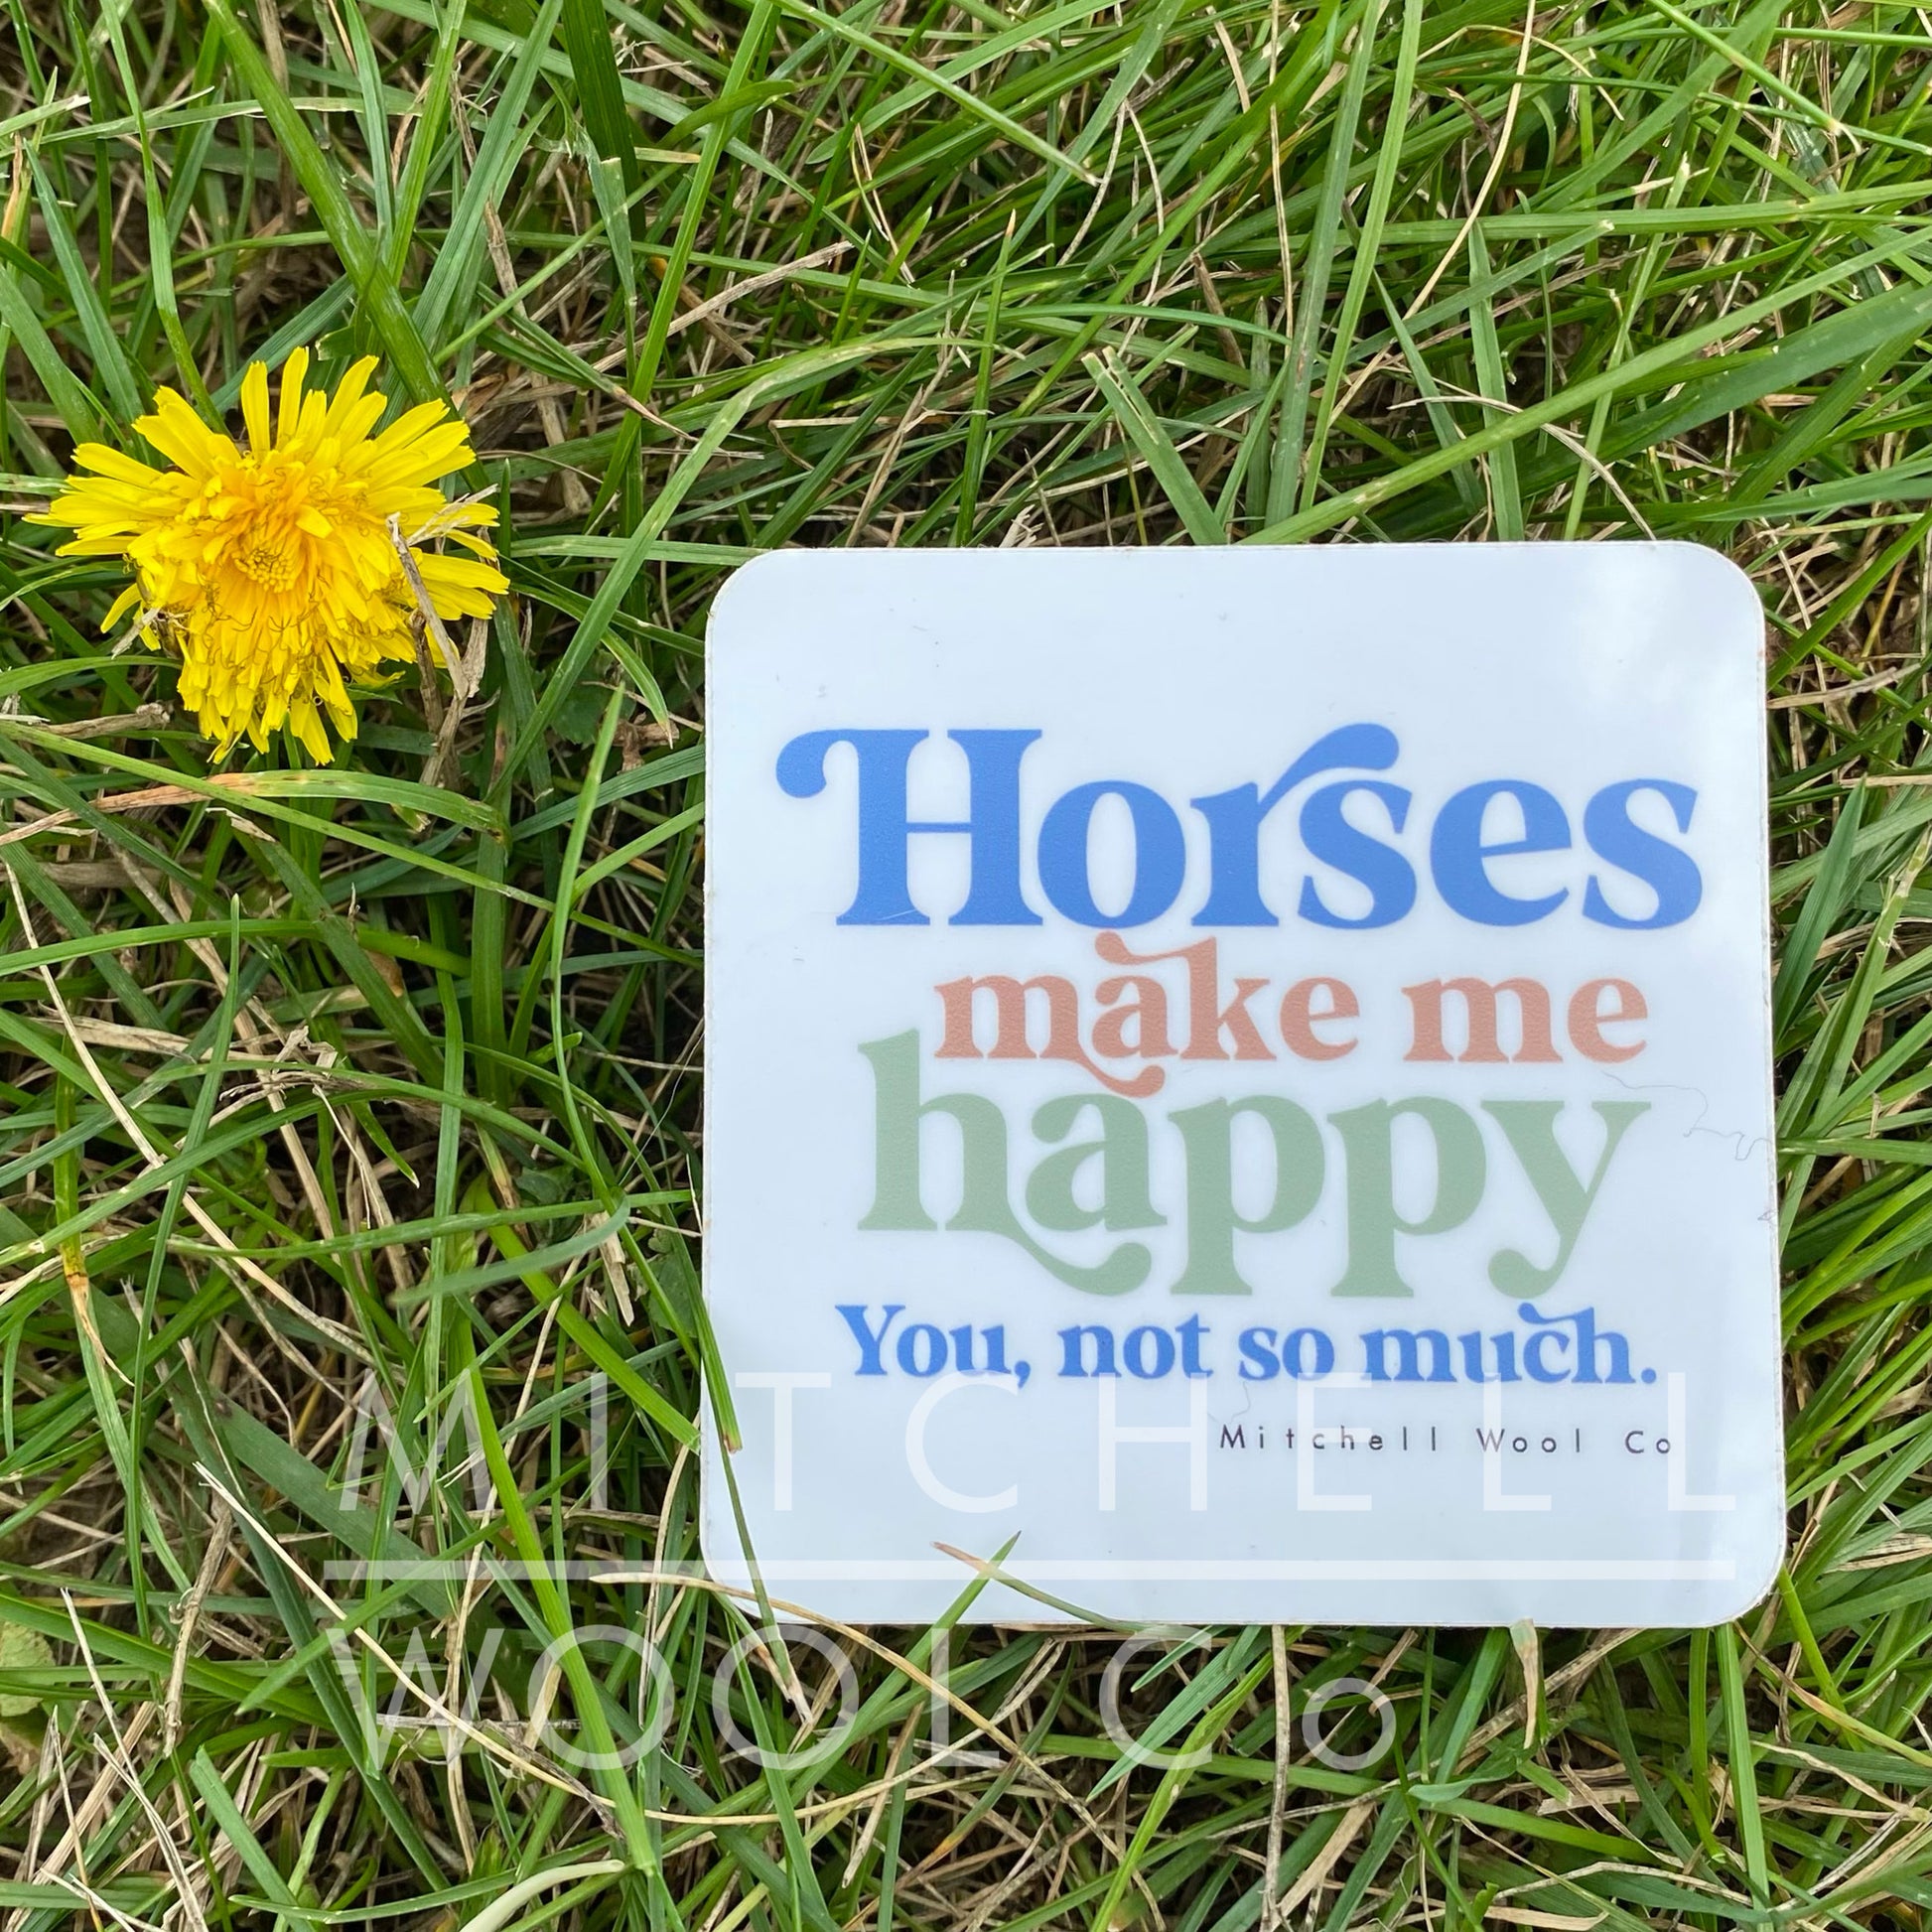 White rounded 3" square sticker with blue, orange, and green writing that reads "horses make me happy, you not so much"